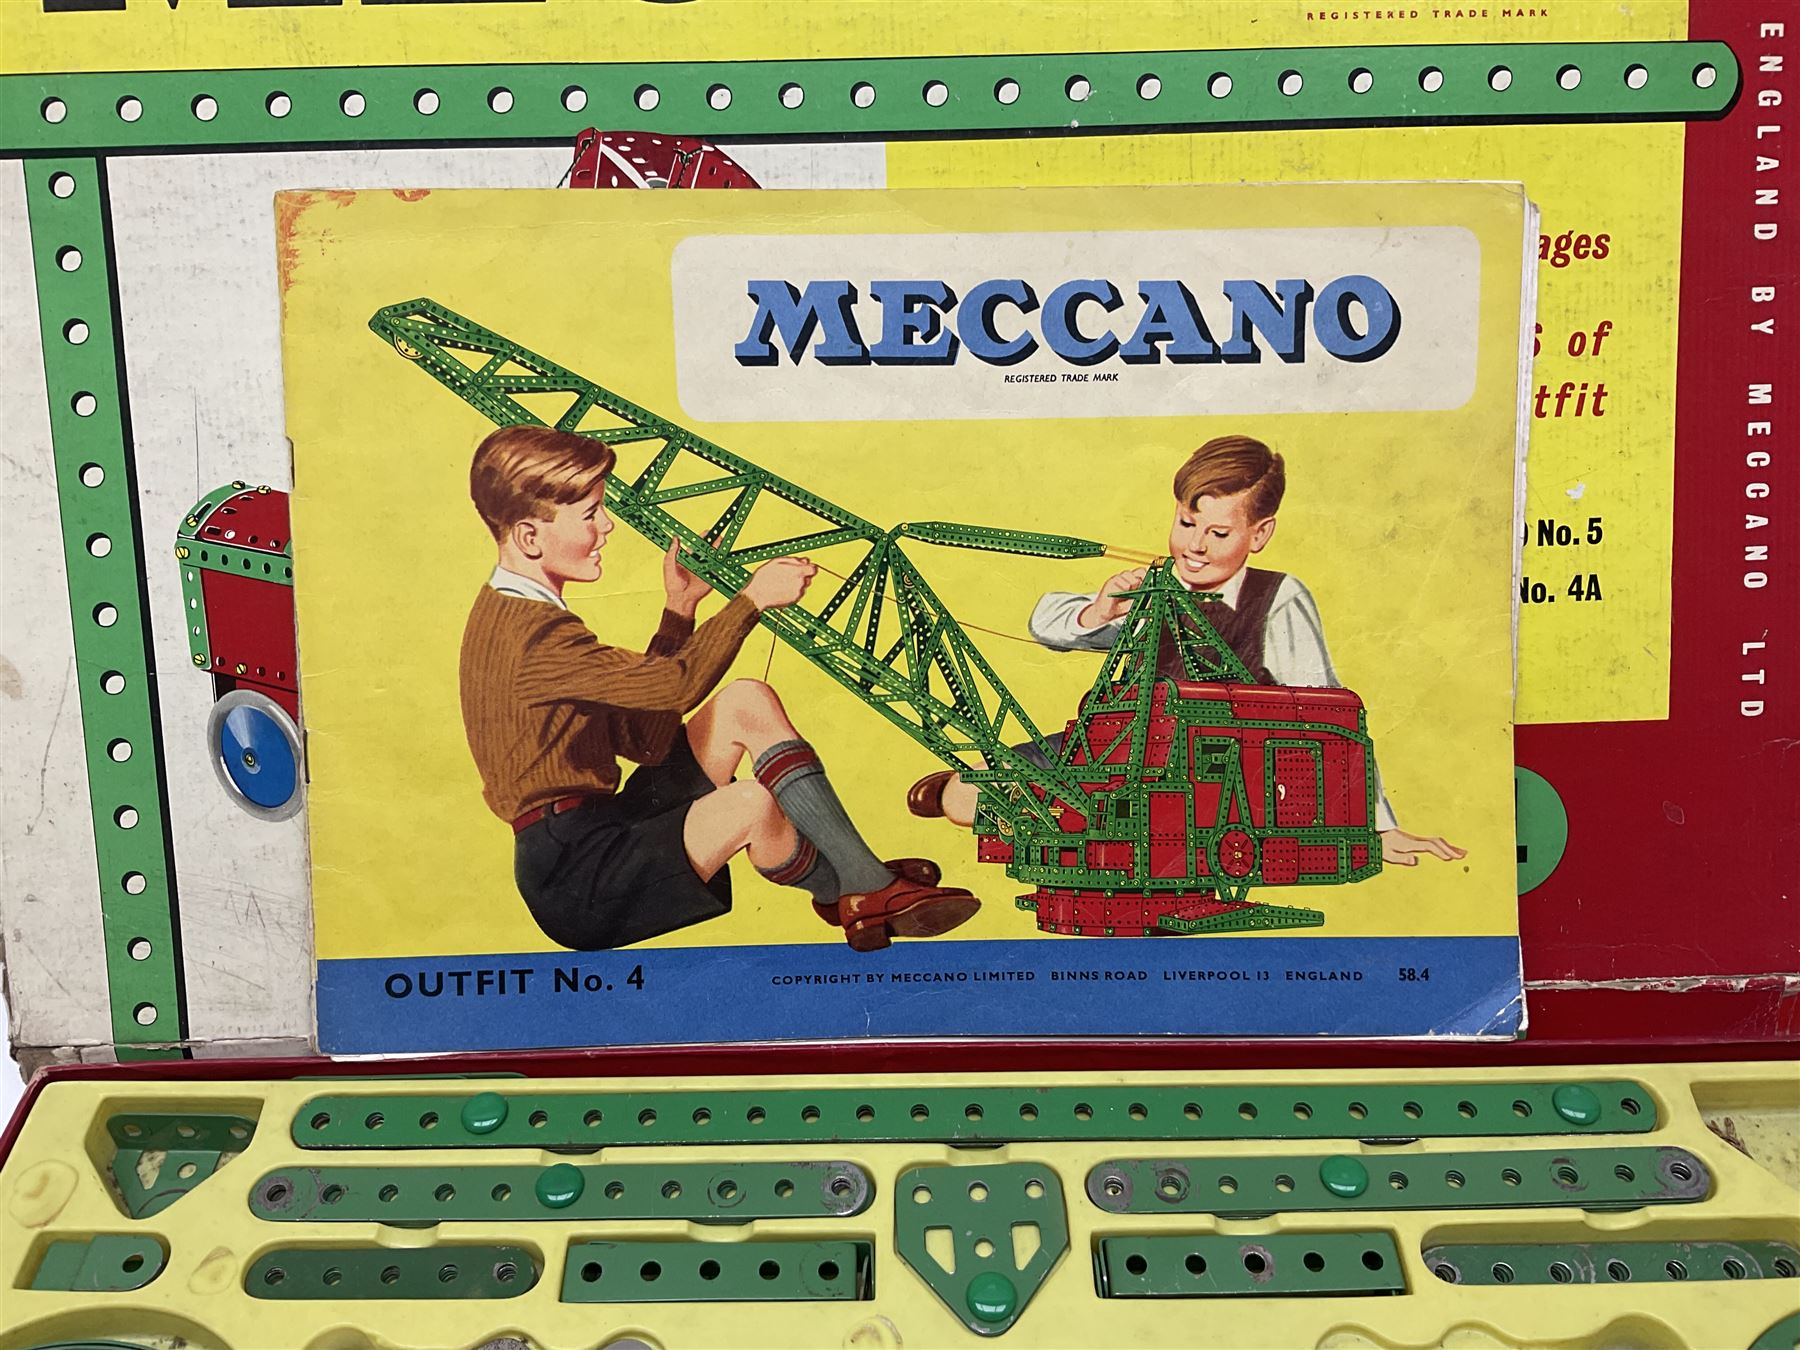 Meccano - Outfits 4 - Image 6 of 8